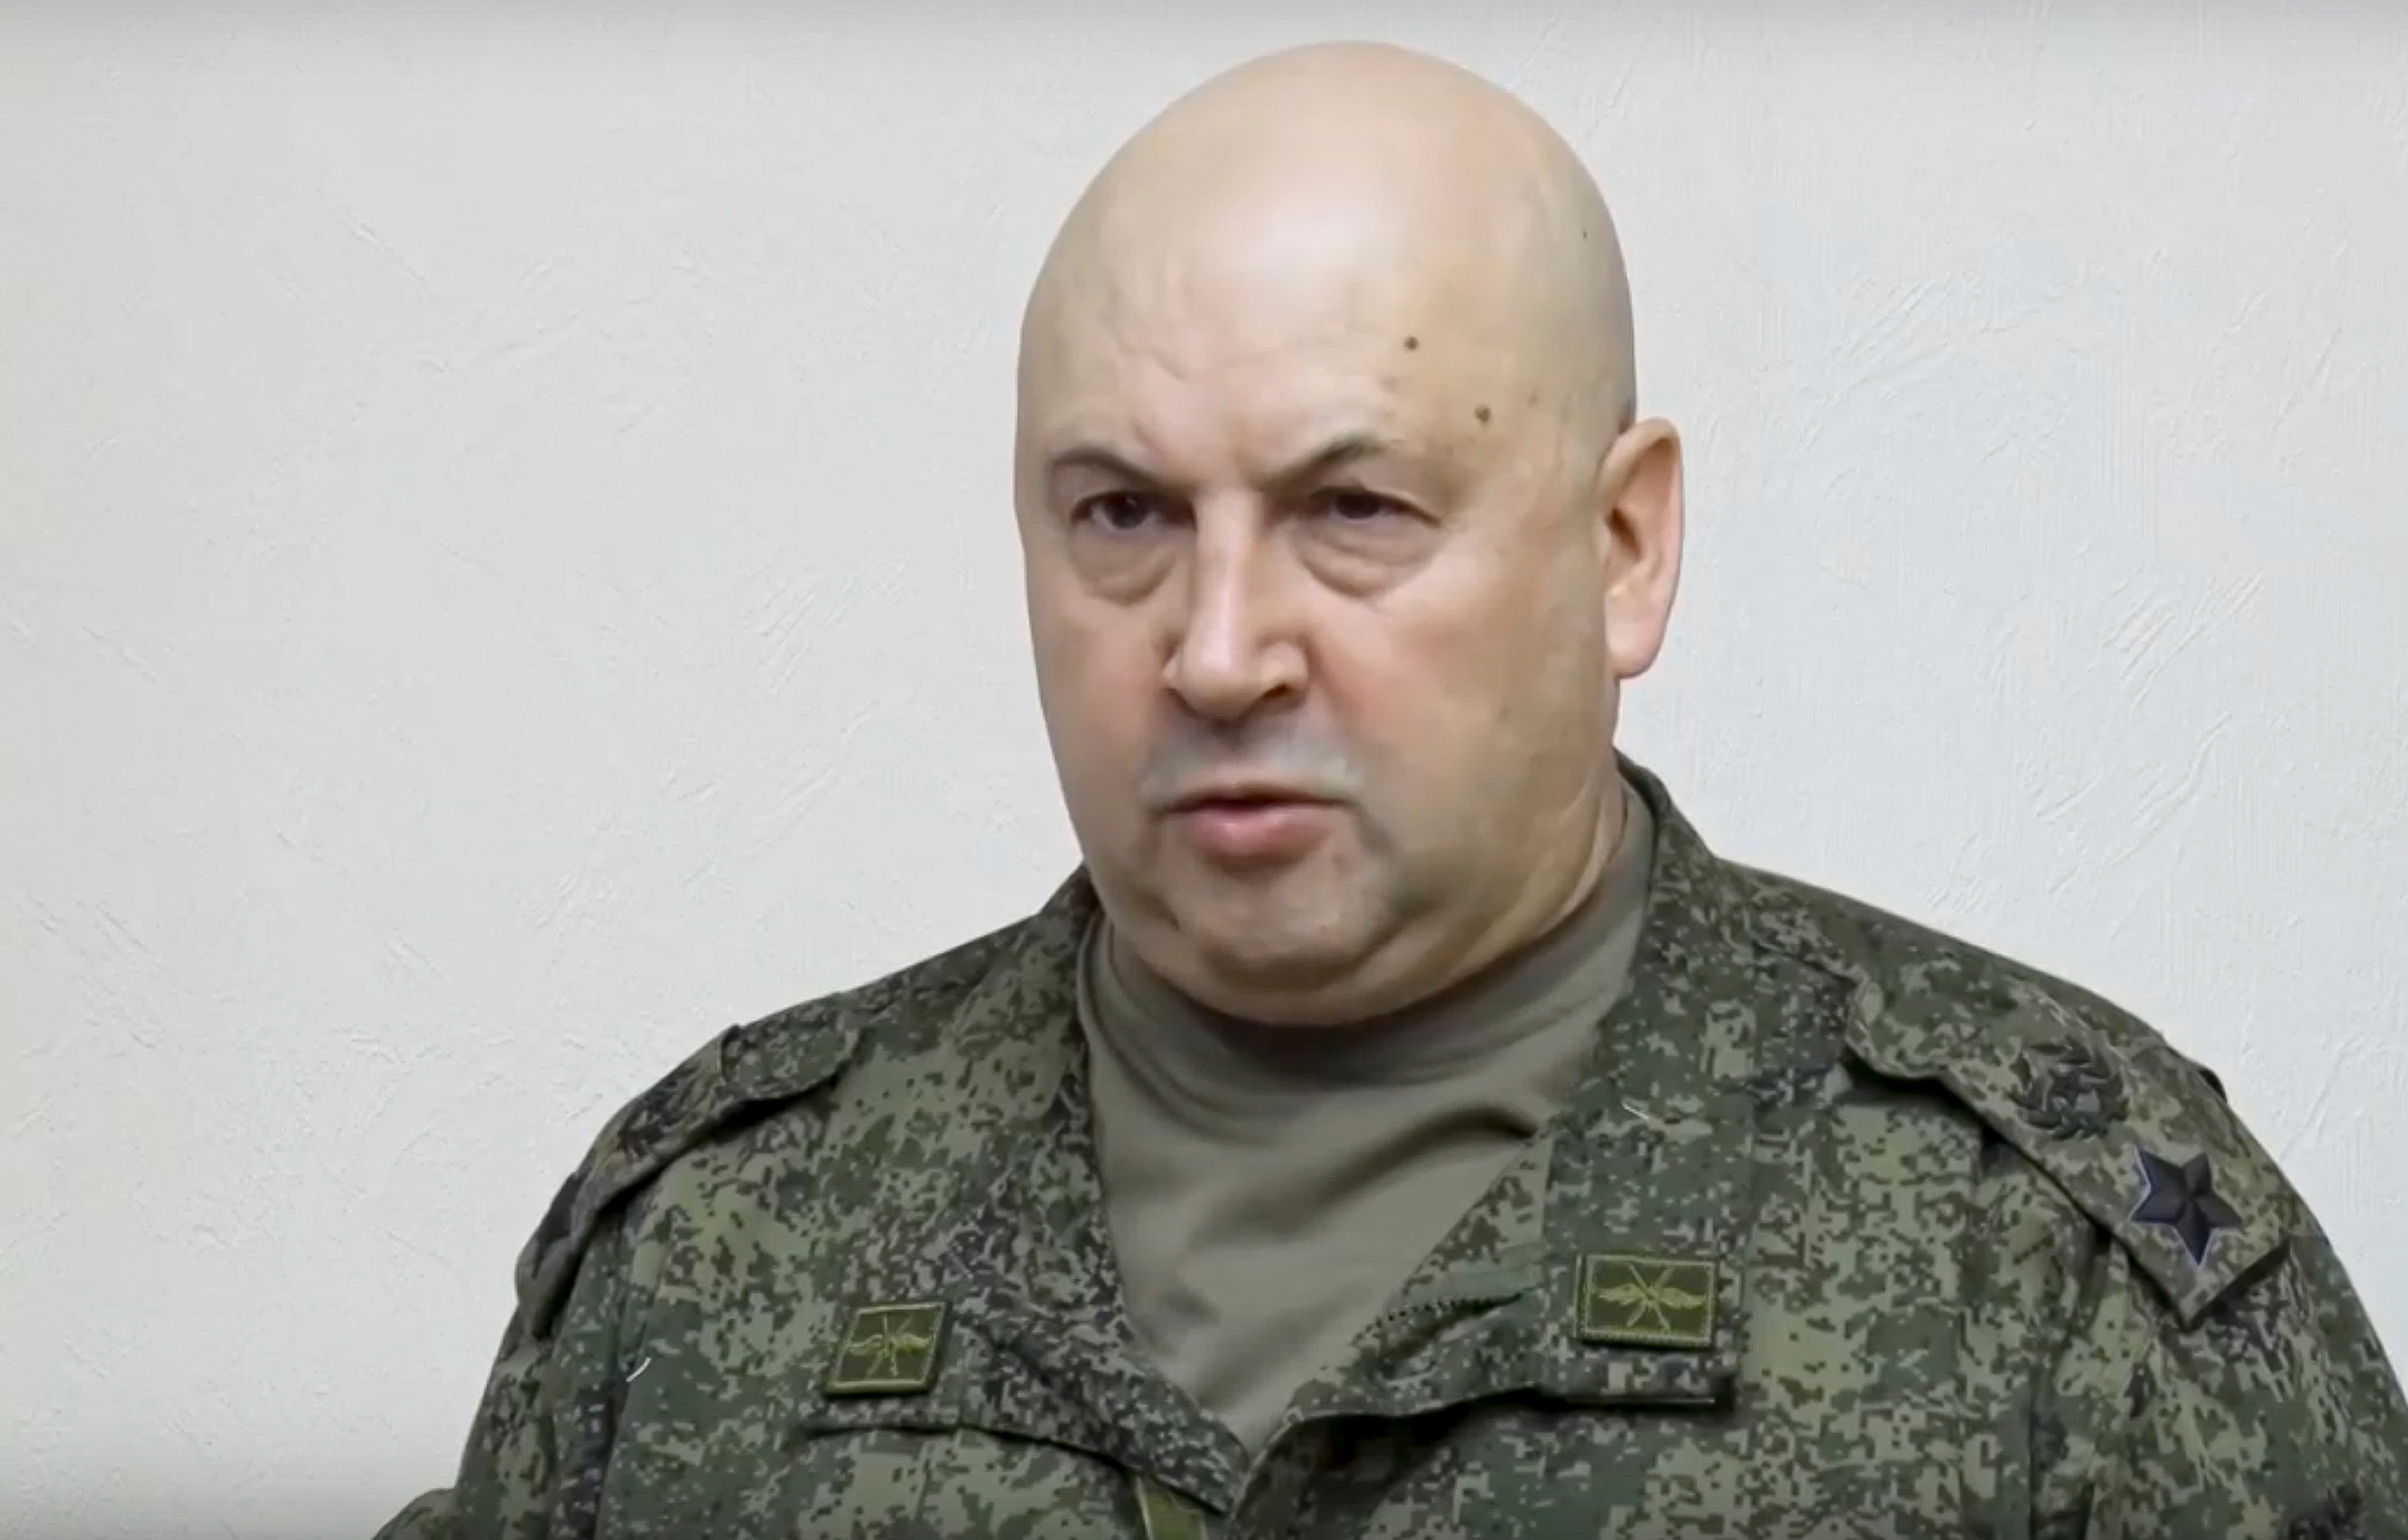 Valery Gerasimov took over from Sergey Surovikin (above) in January 2023 after Surovikin failed to launch aggressive offensives in Ukraine, according to Mark Galeotti